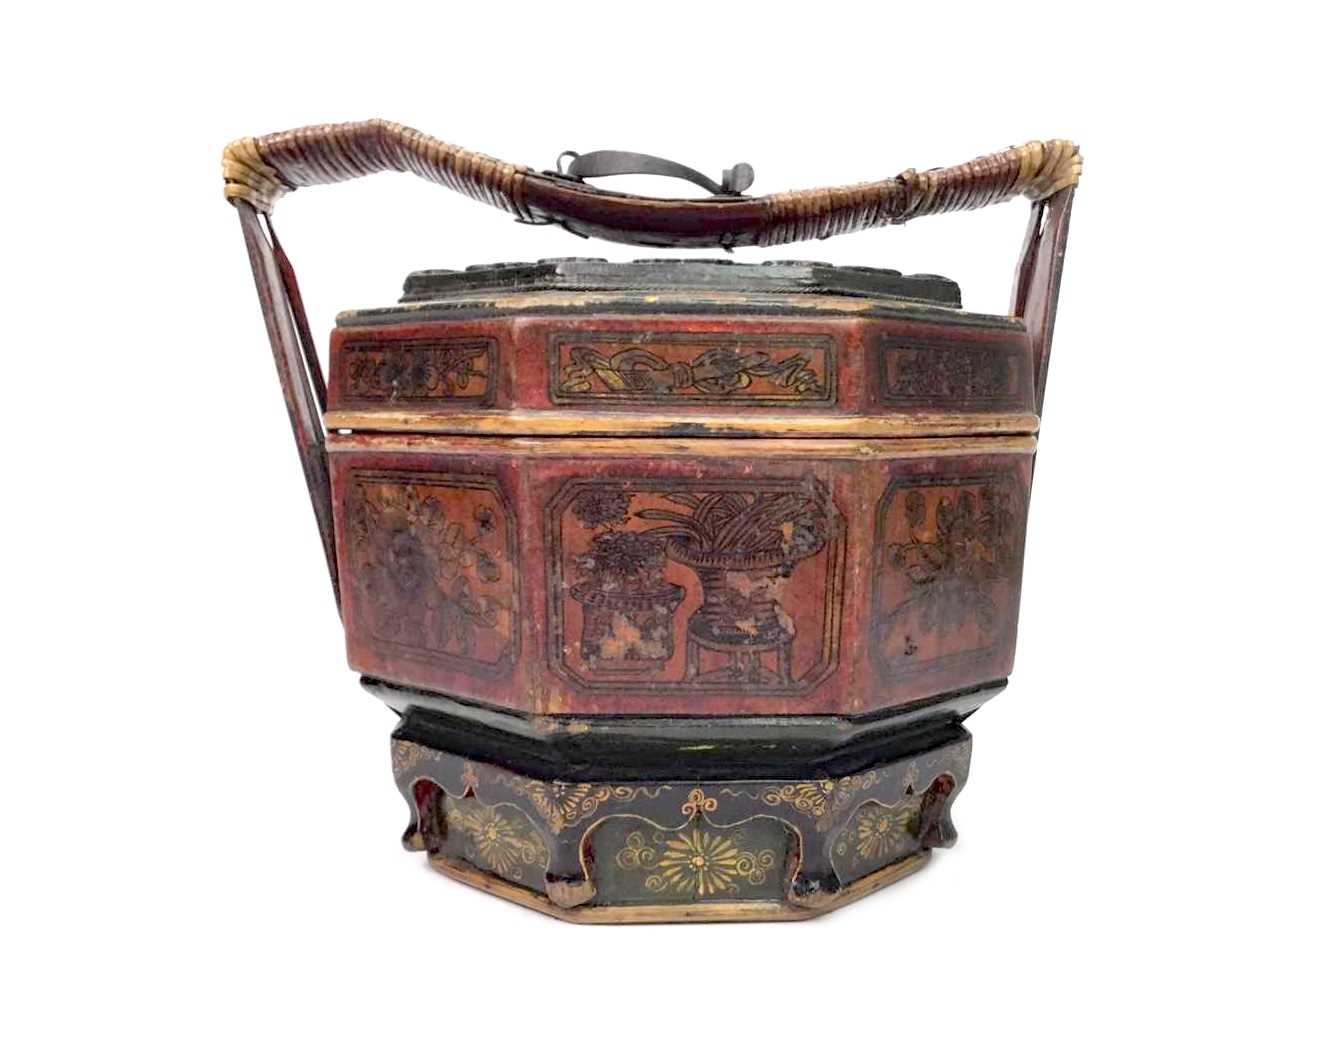 Lot 1102 - A 20TH CENTURY CHINESE LACQUERED WOOD WEDDING BASKET